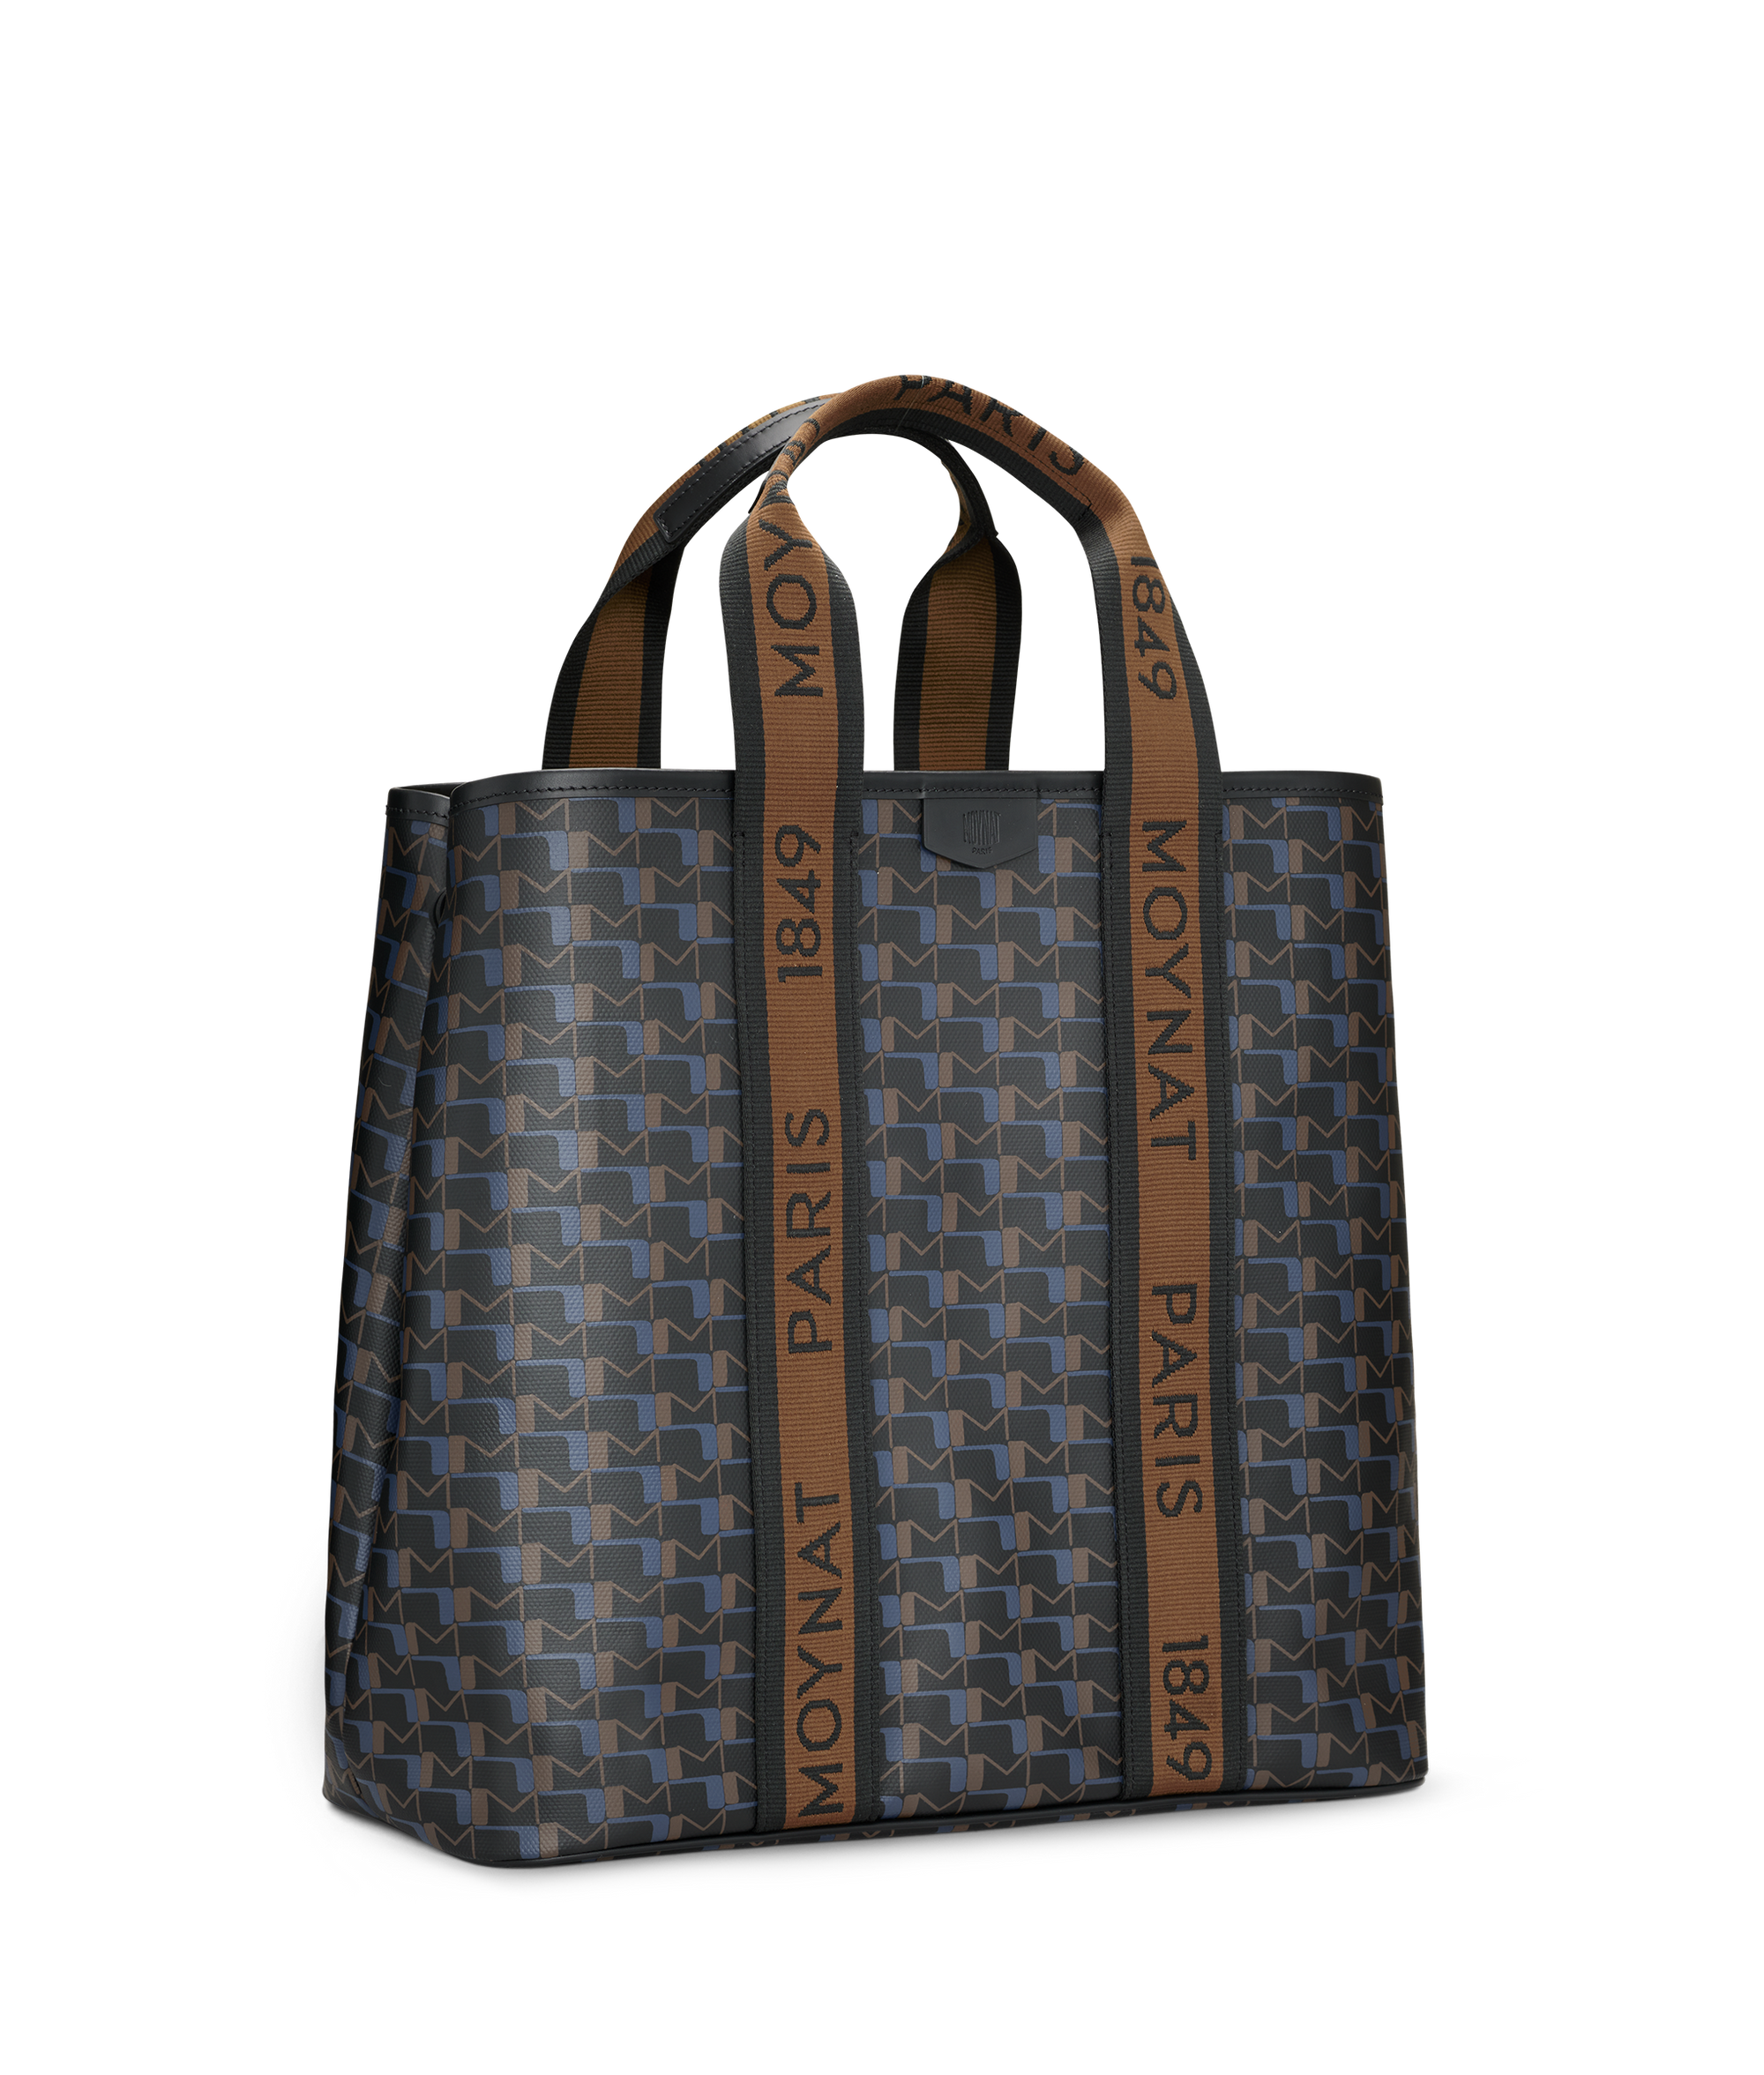 Moynat Bag Canvas Tote Bag Carbon Bronze With Dustbag Women'S Mint  Near Unused